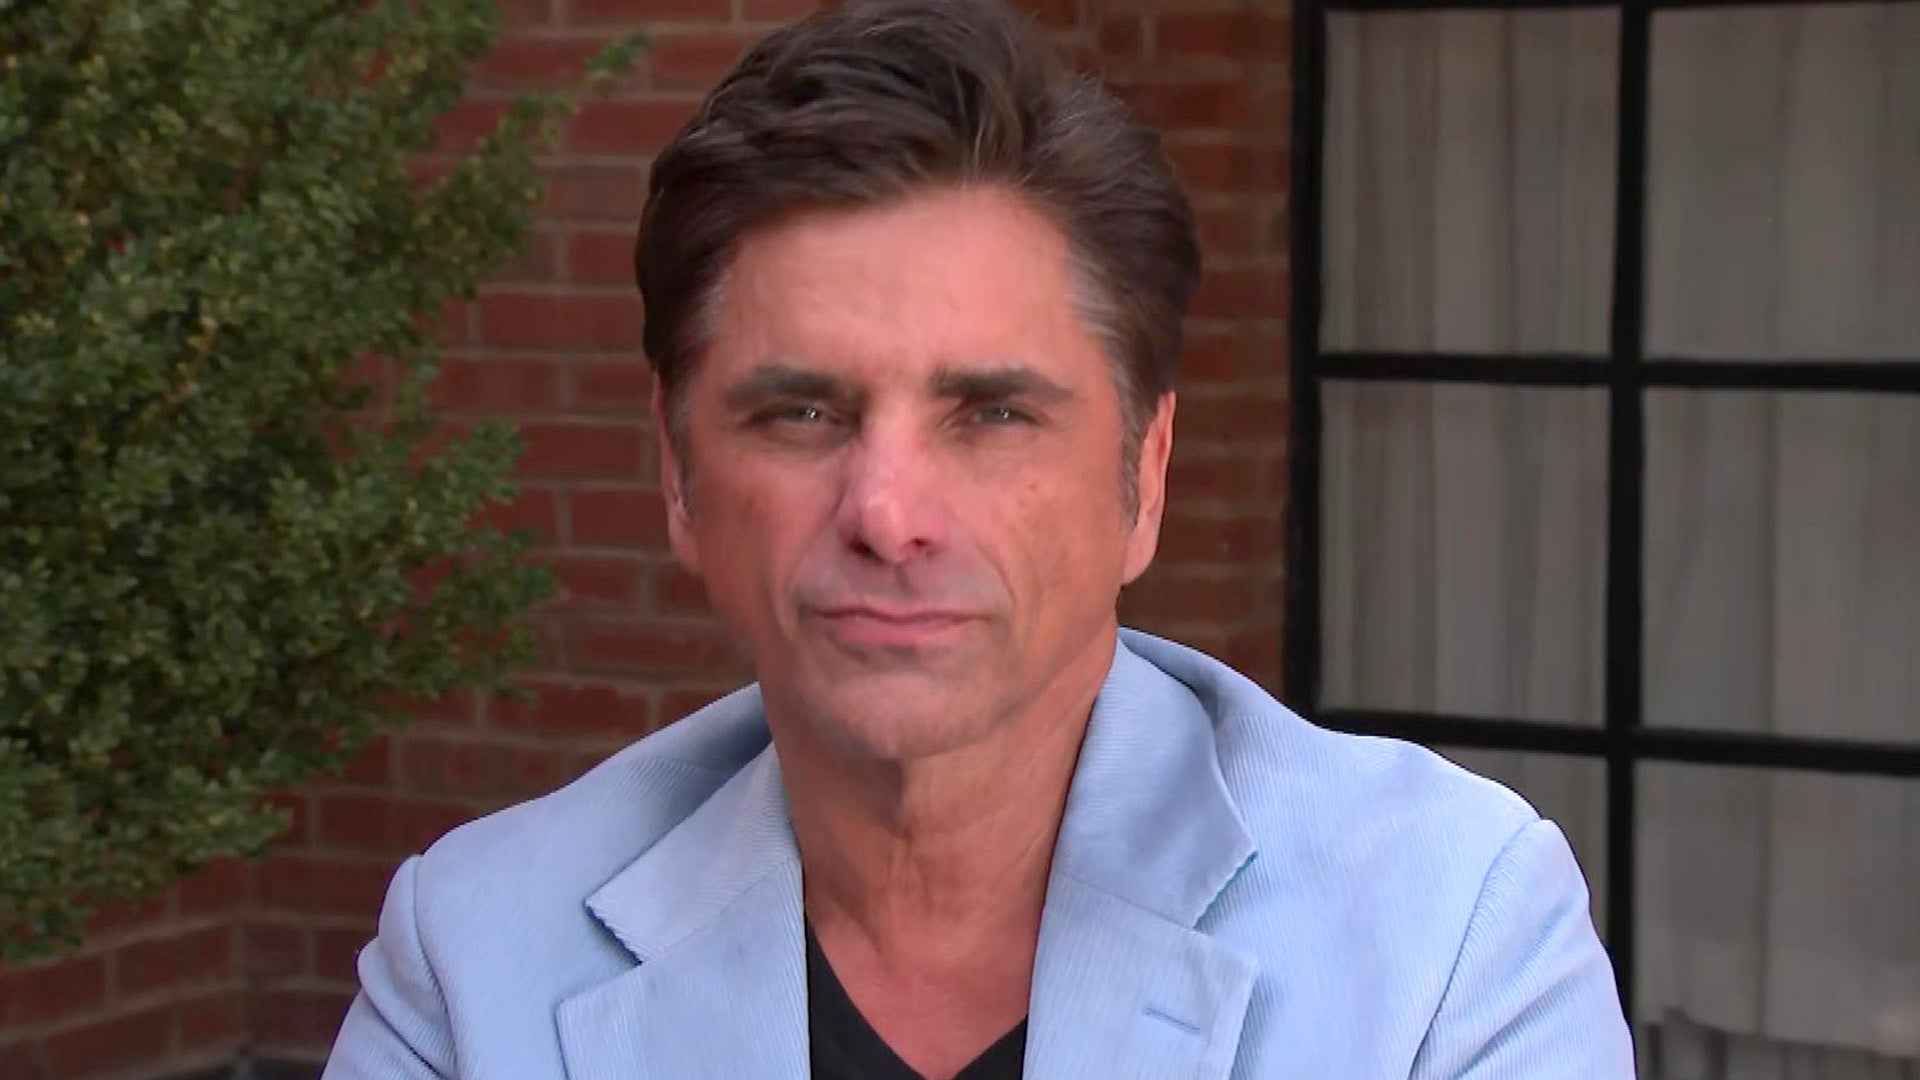 John Stamos Addresses Why He Included Confessions About Ex-Wife Rebecca Romijn in New Memoi